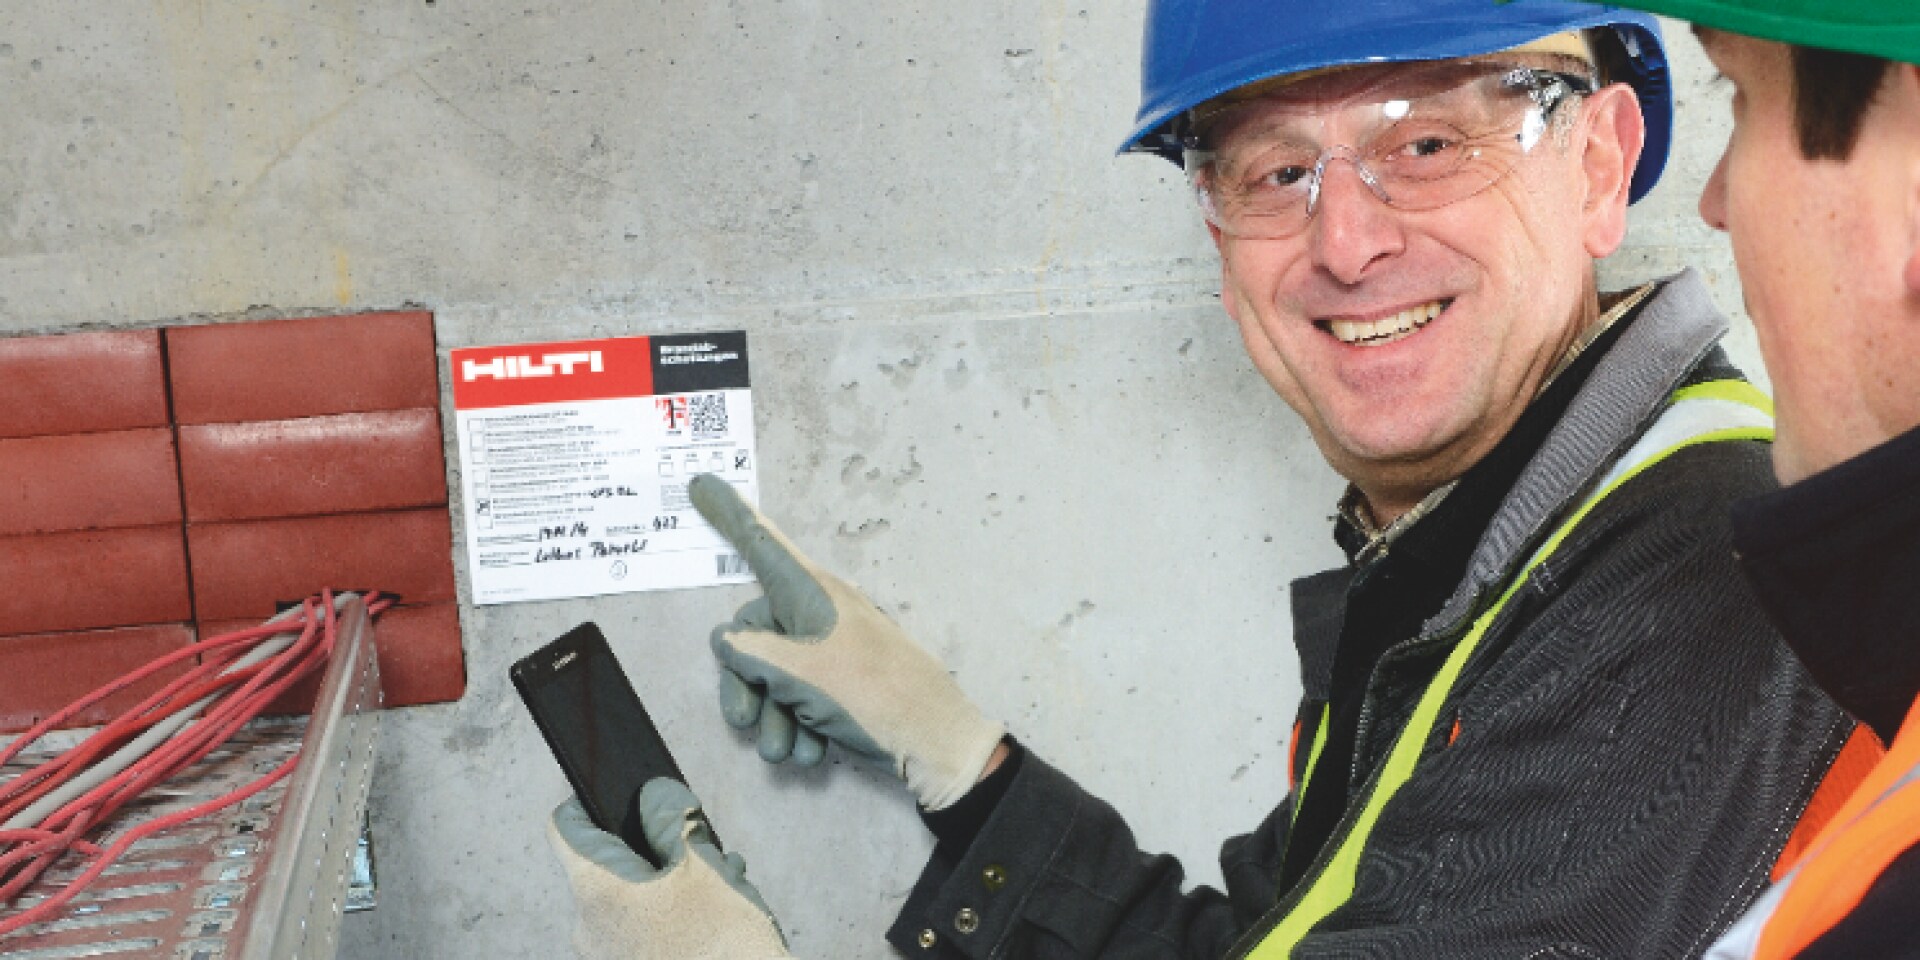 Firestop Intumescent sealant documented using BIM-compatible software integrating technology in construction work and facility management